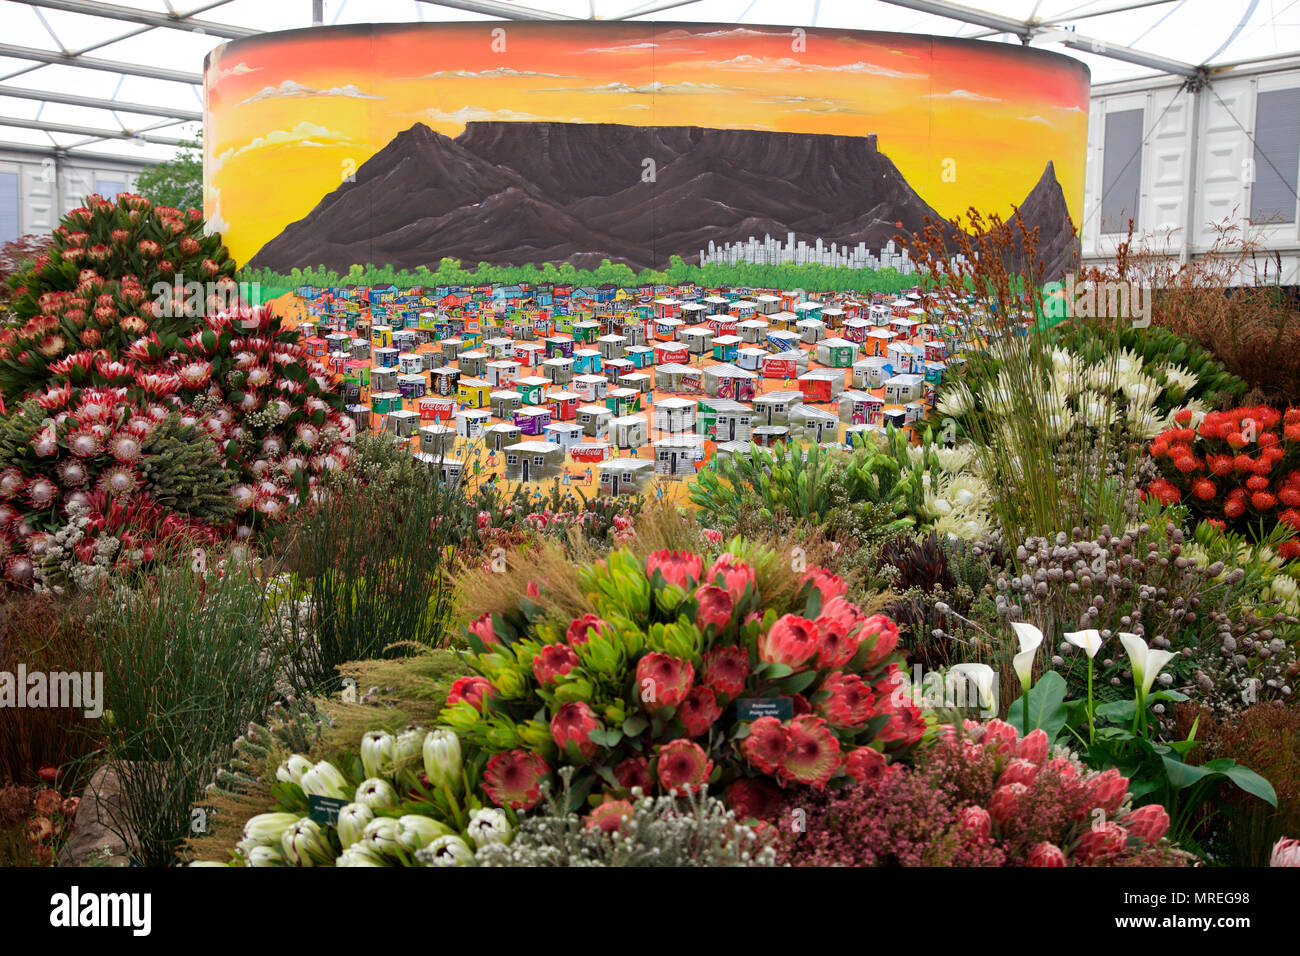 Display of Cape Town flora by Leon Kluge in the Great Pavision, RHS Chelsea Flower Show 2018 Stock Photo